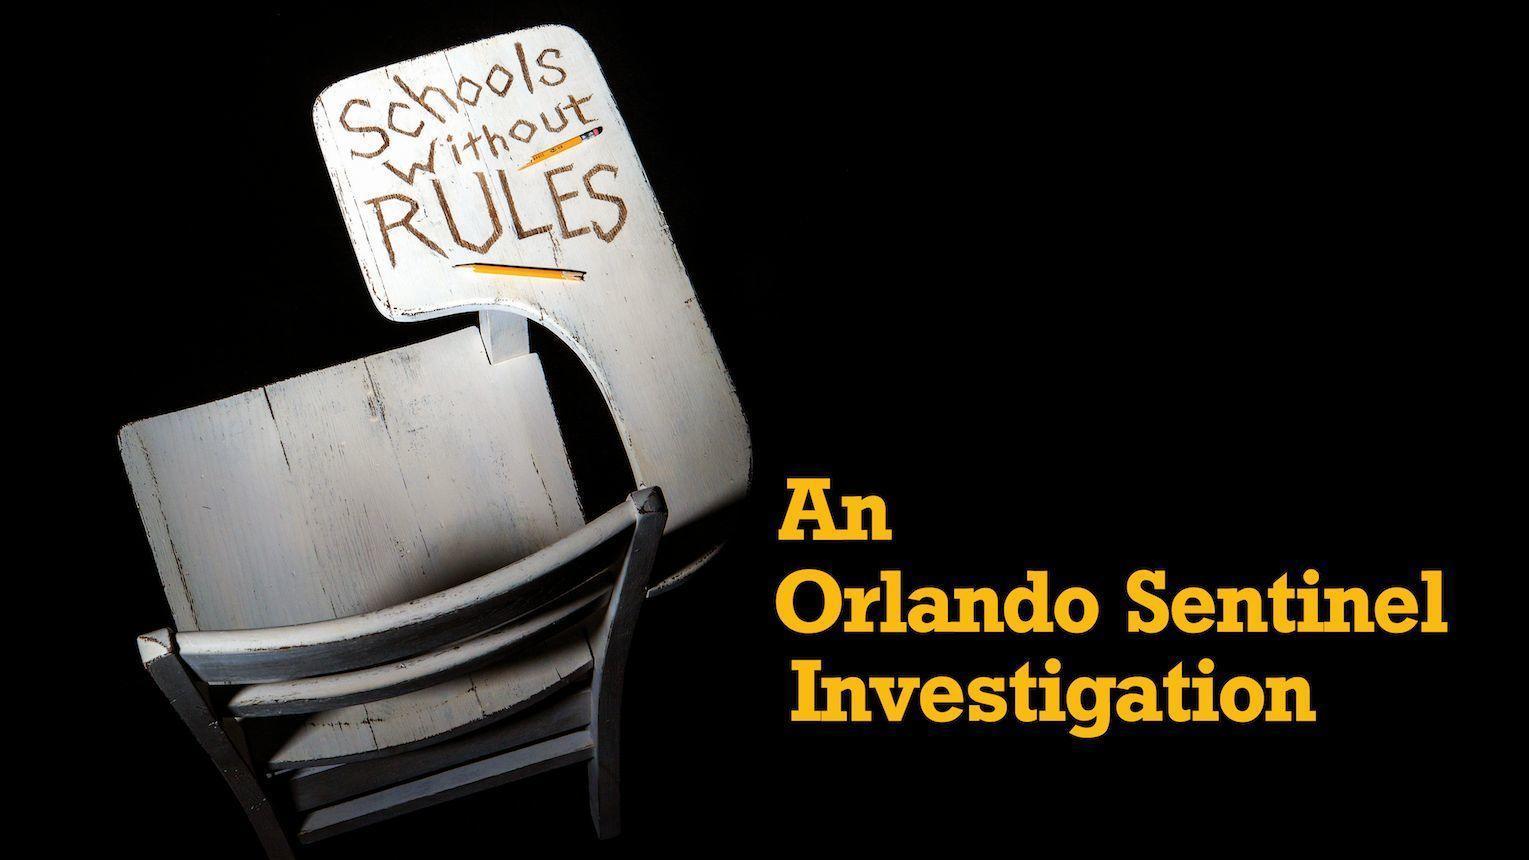 Florida private schools get nearly $1 billion in state scholarships with little oversight, Sentinel finds